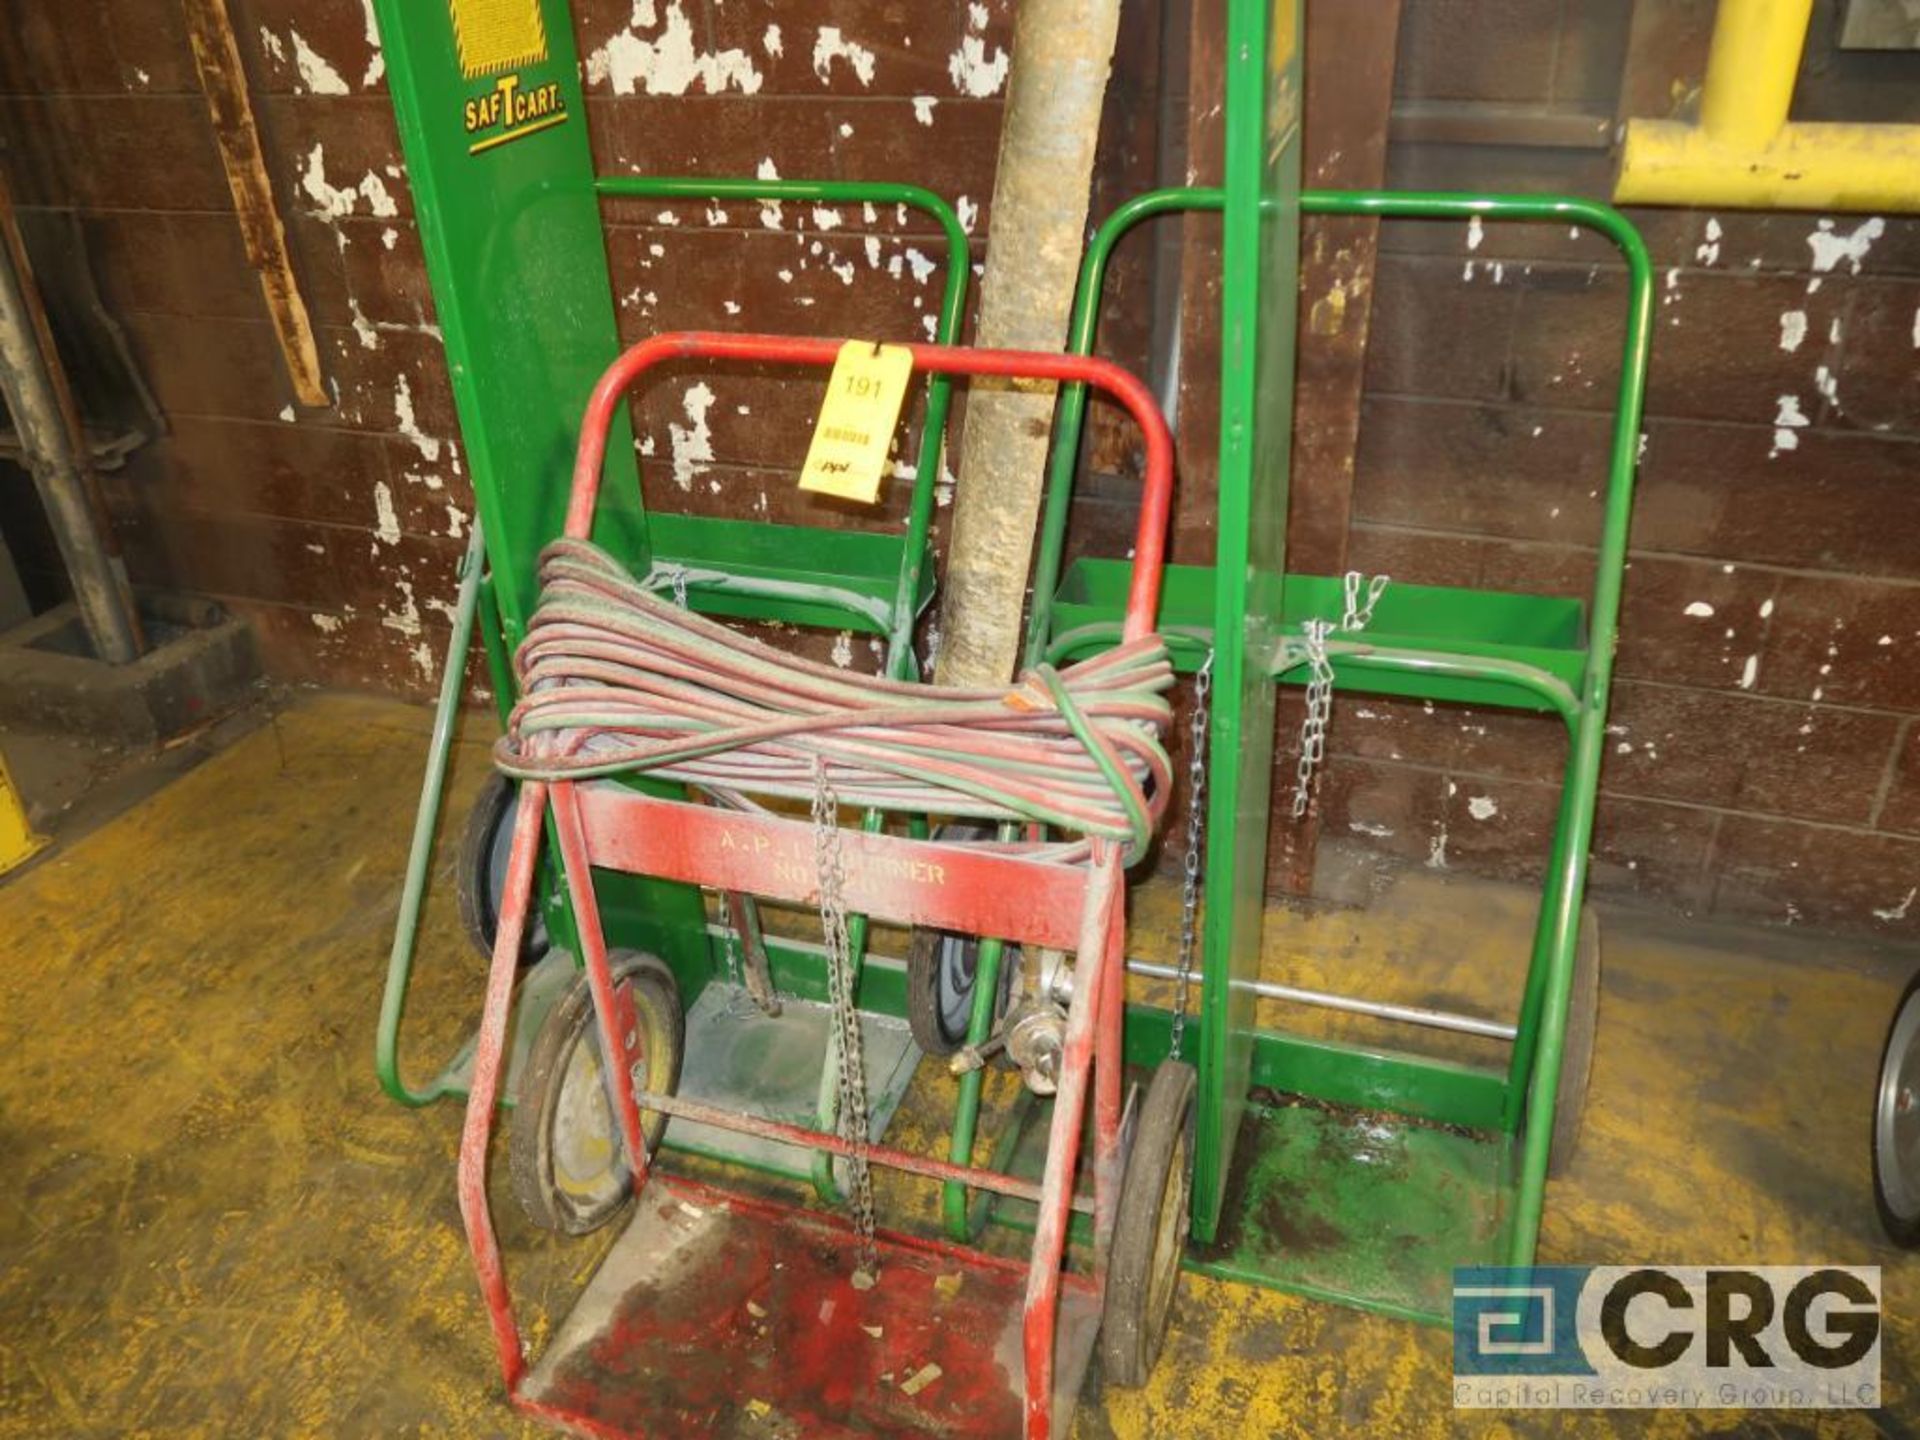 Lot of (3) acetylene carts, (2) Saftcart (no hose and gauge), and (1) with hose and gauge (Rigging